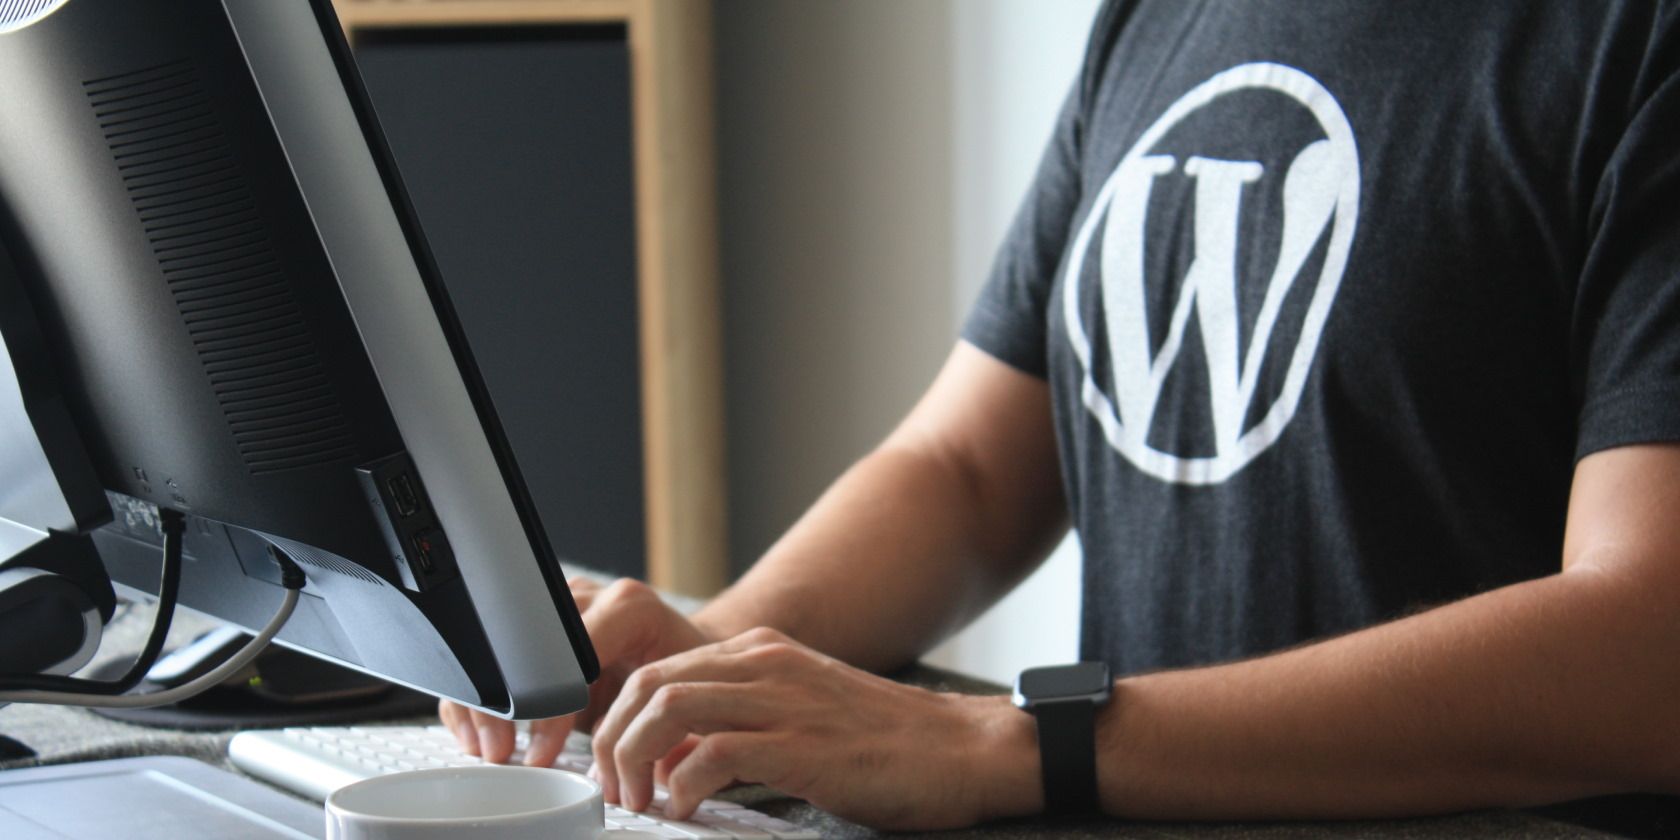 Person with WordPress shirt working at PC